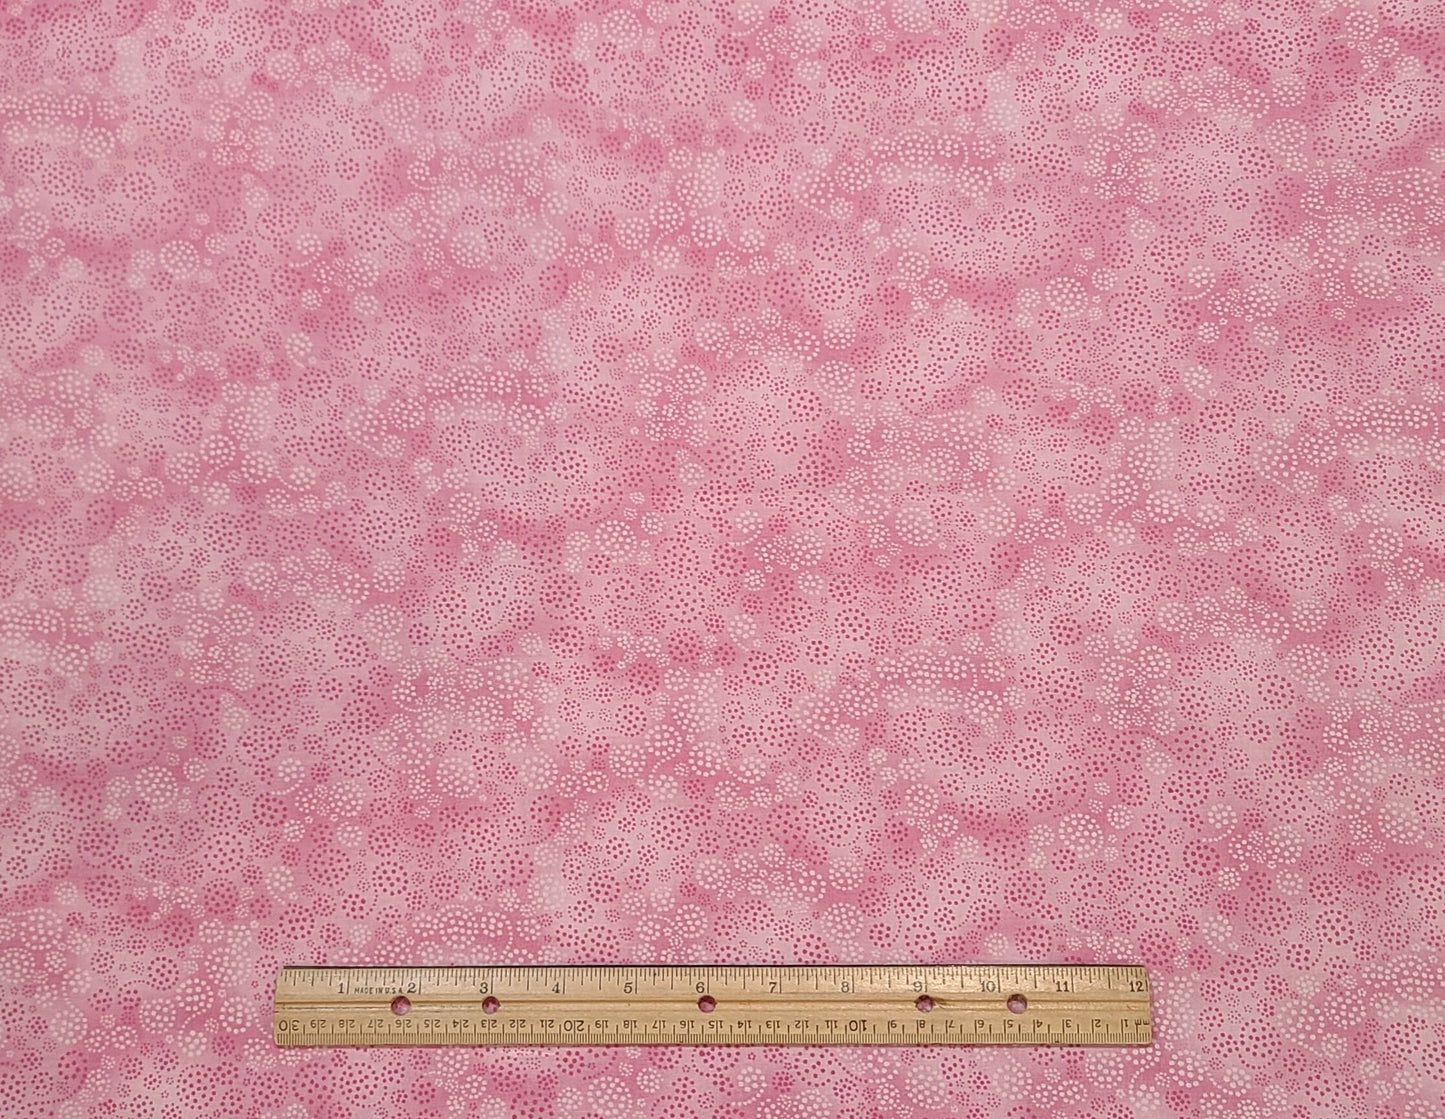 Essentials by Wilmington Prints - Light Pink Tonal Fabric / Pink and White Dotted Scroll Pattern